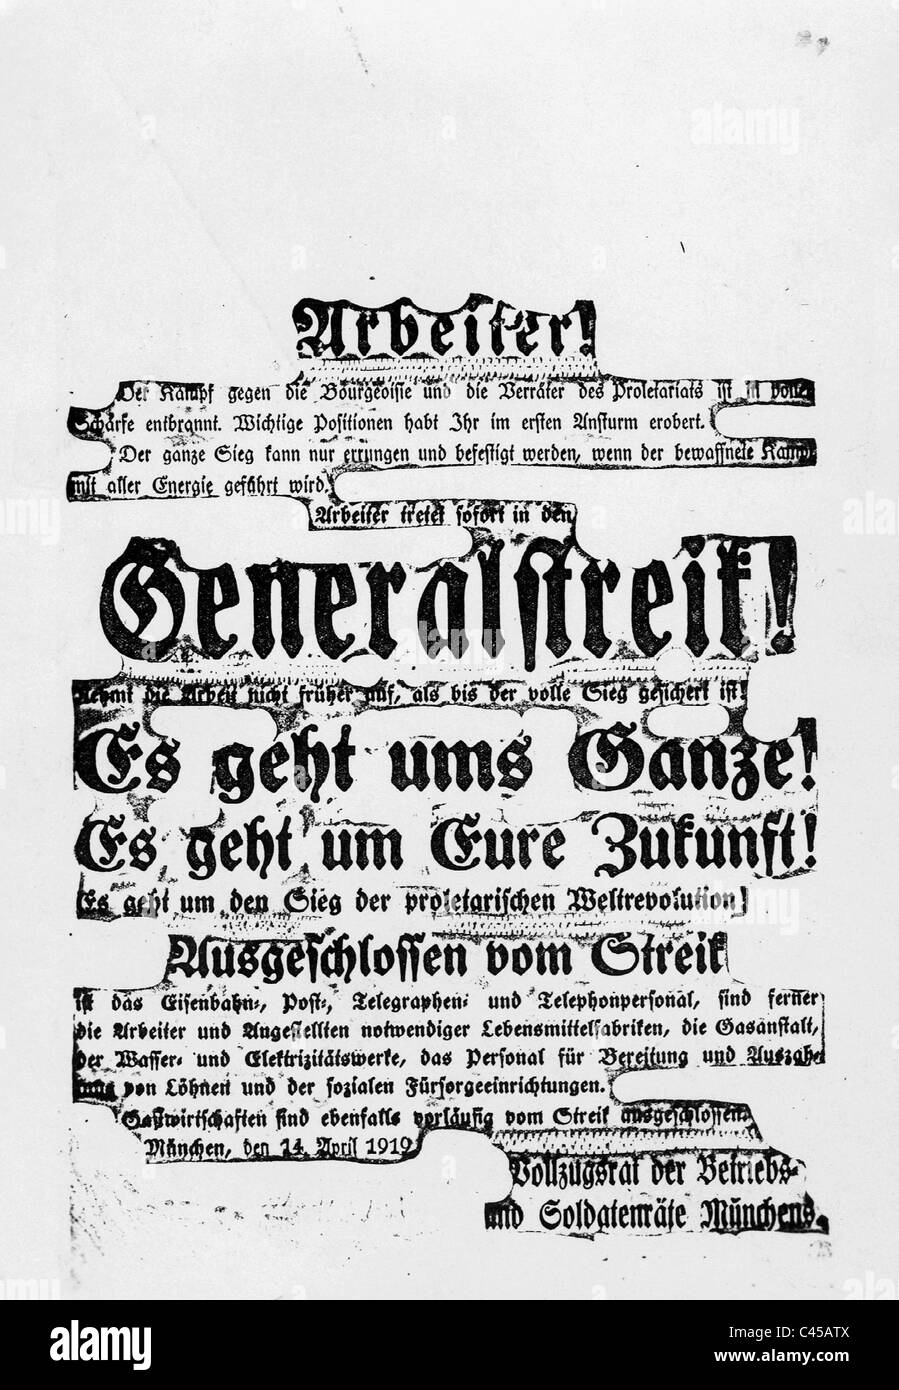 Call for a general strike in Munich, 1919 Stock Photo